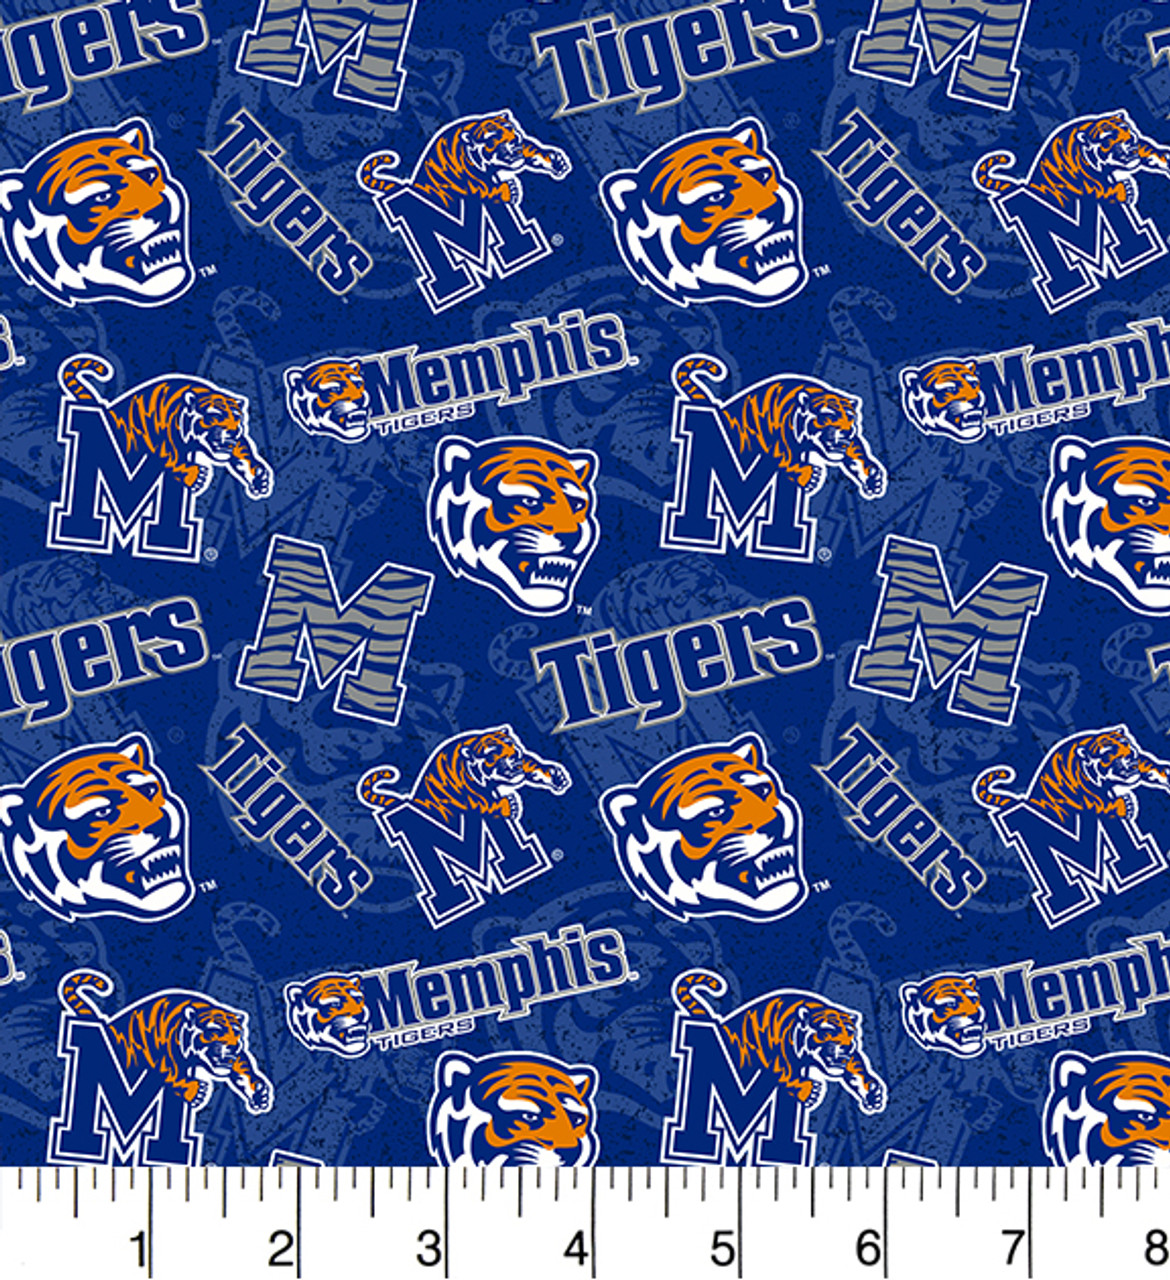 University of Memphis Tigers Cotton Fabric with Tone On Tone Print or Matching Solid Cotton Fabrics